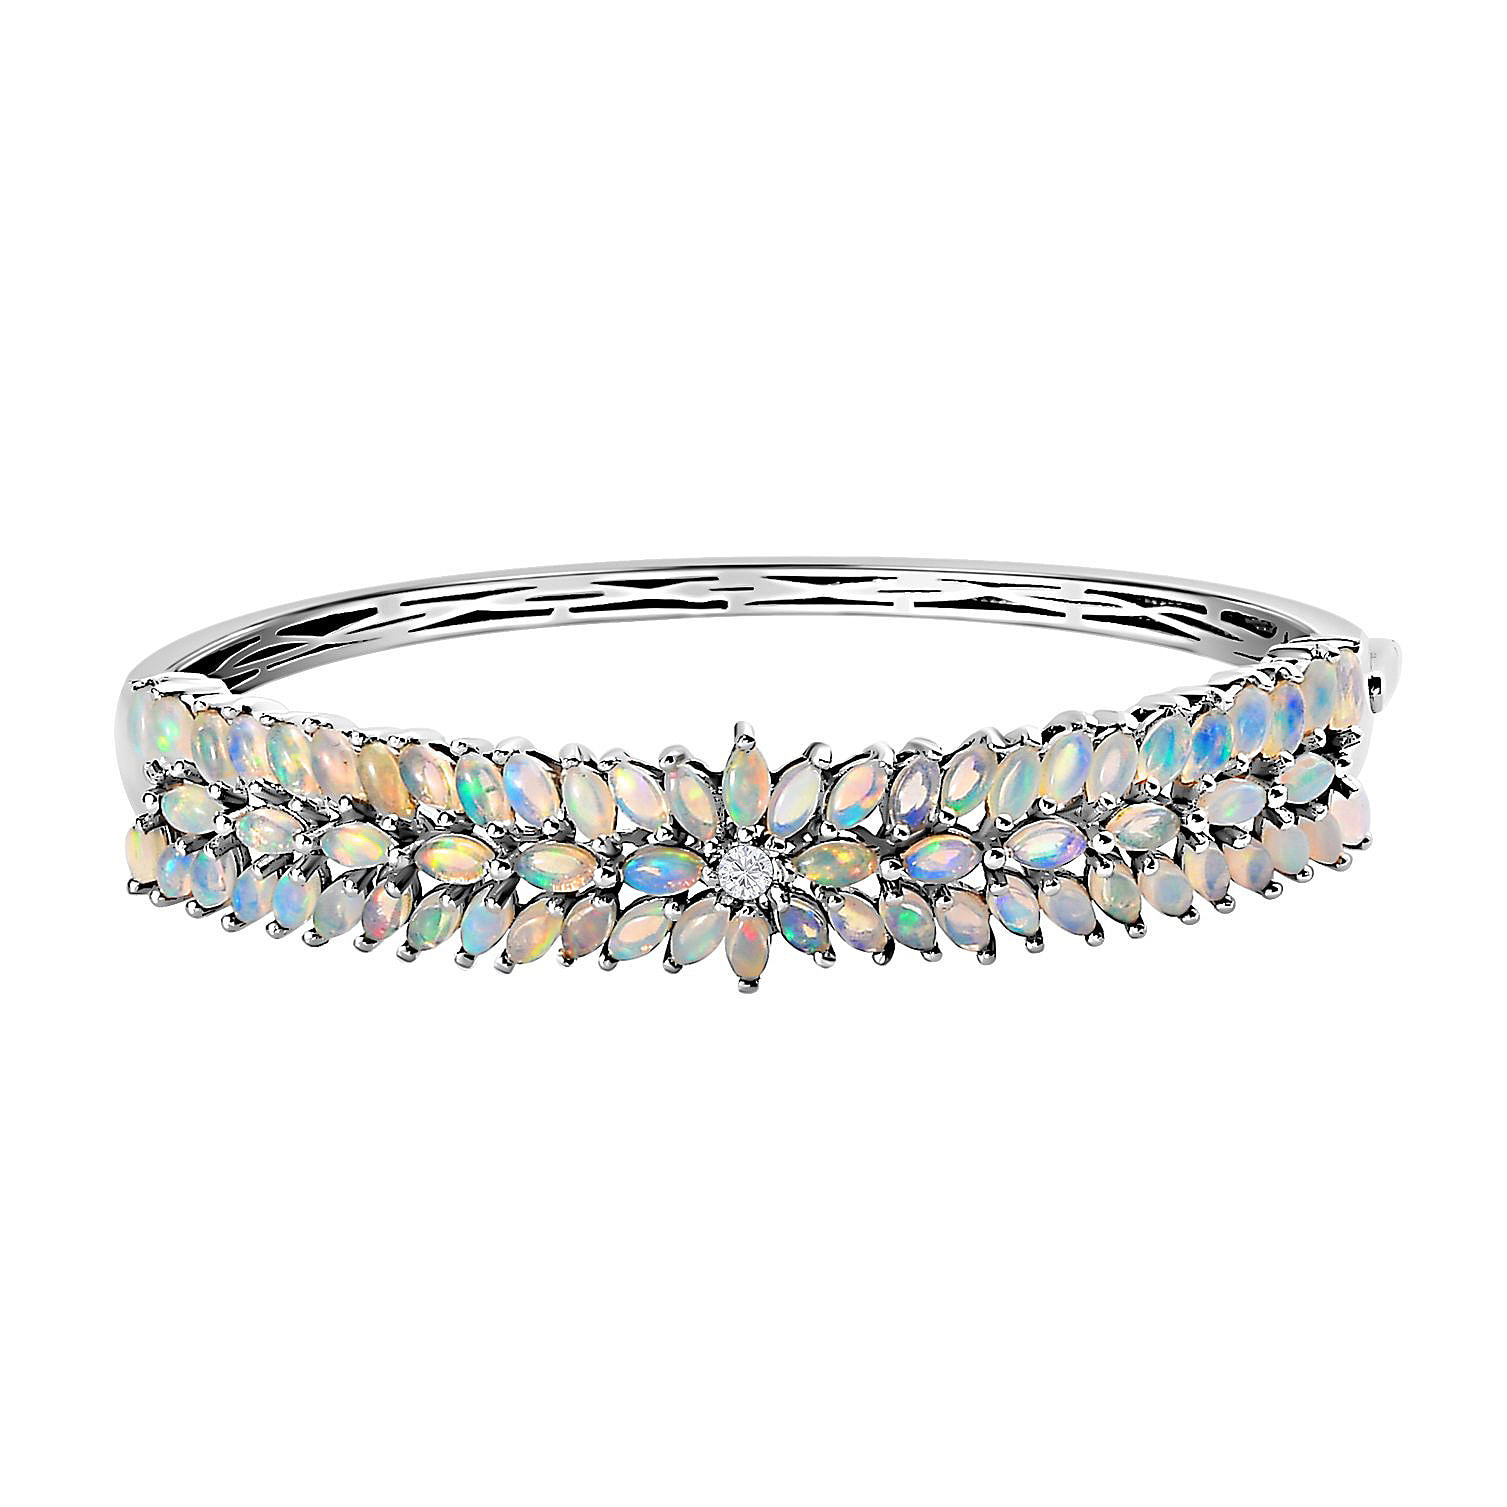 Ethiopian Welo Opal and Natural Cambodian Zircon Full Bangle (Size - 7.5)  in Platinum Overlay Sterling Silver 7.091 Ct, Silver Wt. 20.80 Gms